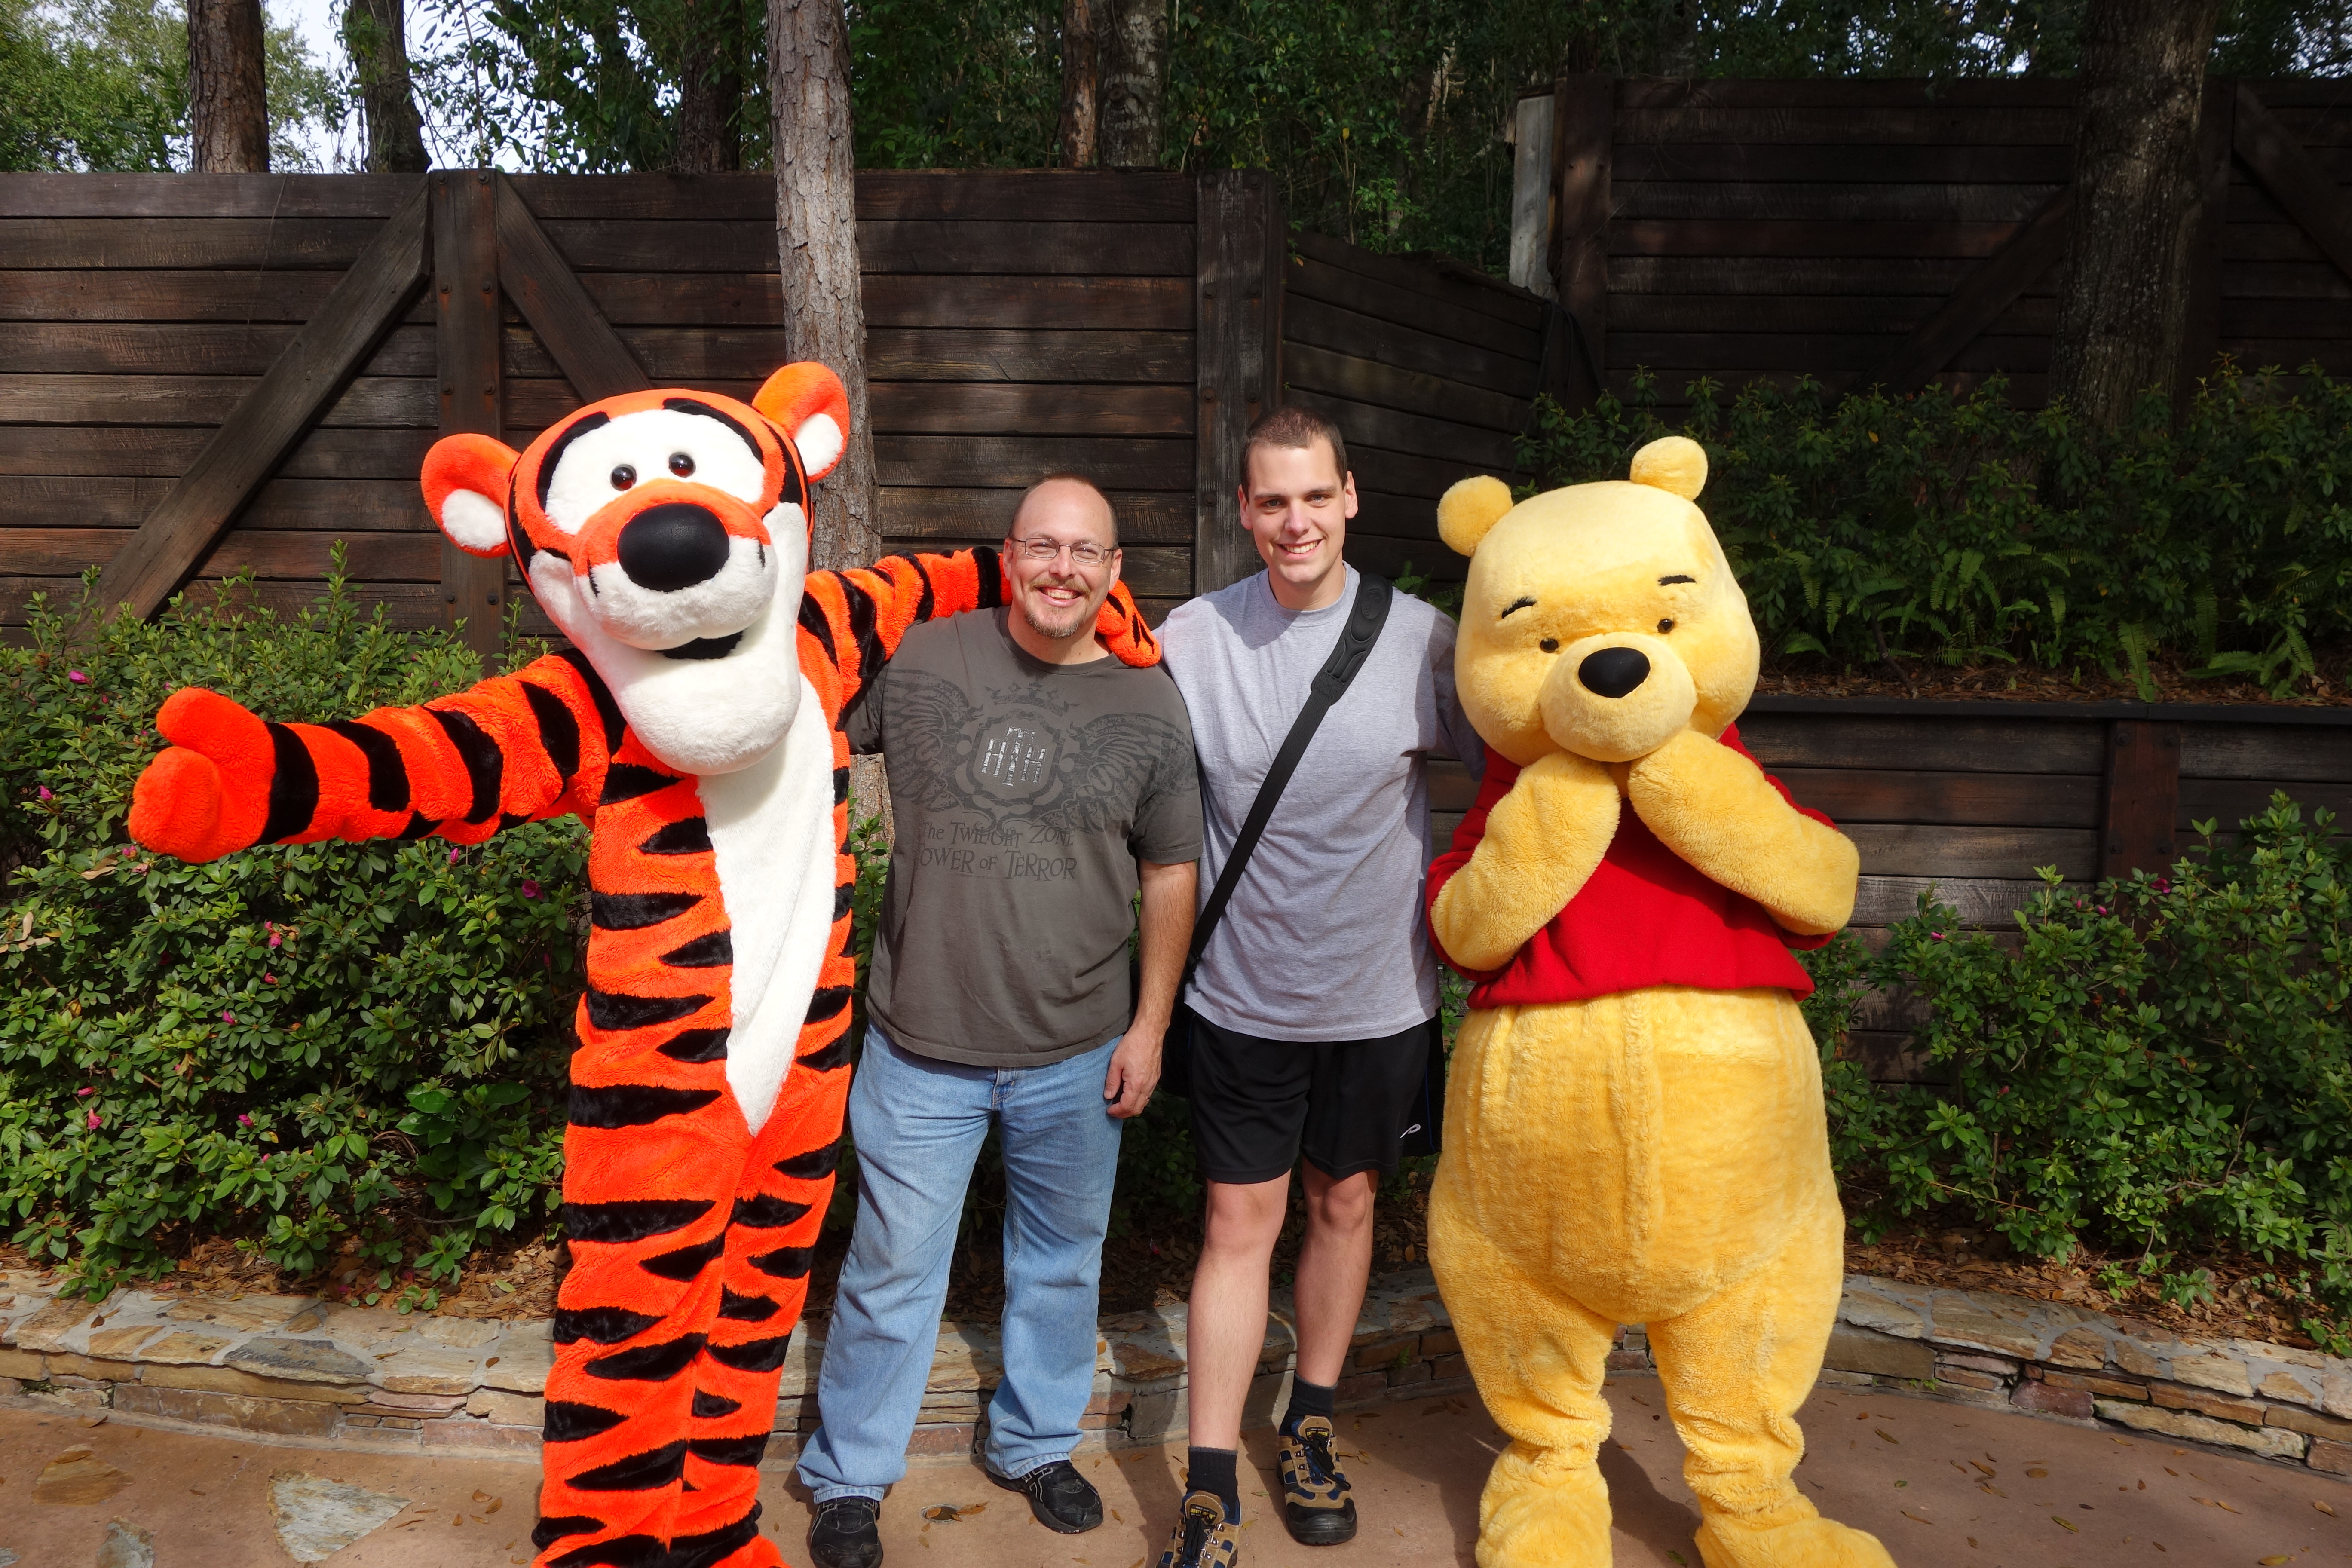 EuroRob and I meeting Winnie the Pooh and Tigger in Frontierland.